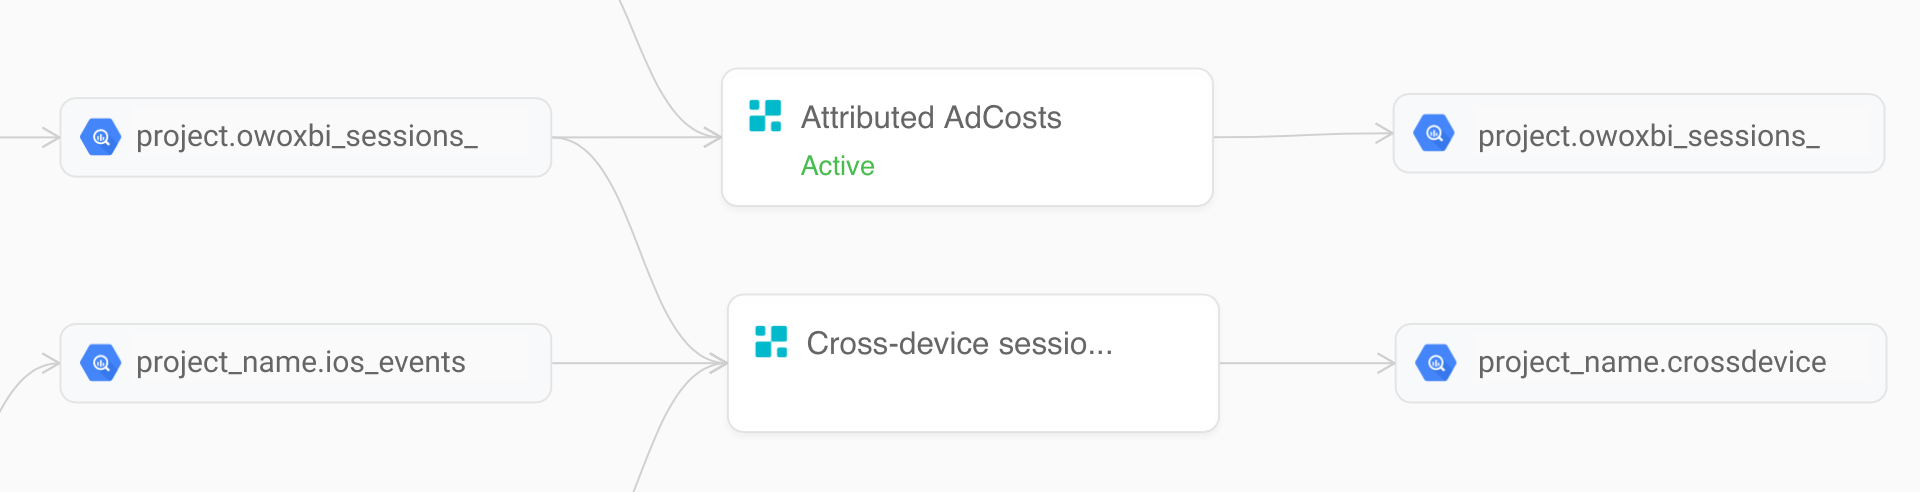 Cross-device sessions and Attributed AdCosts on the Workspace